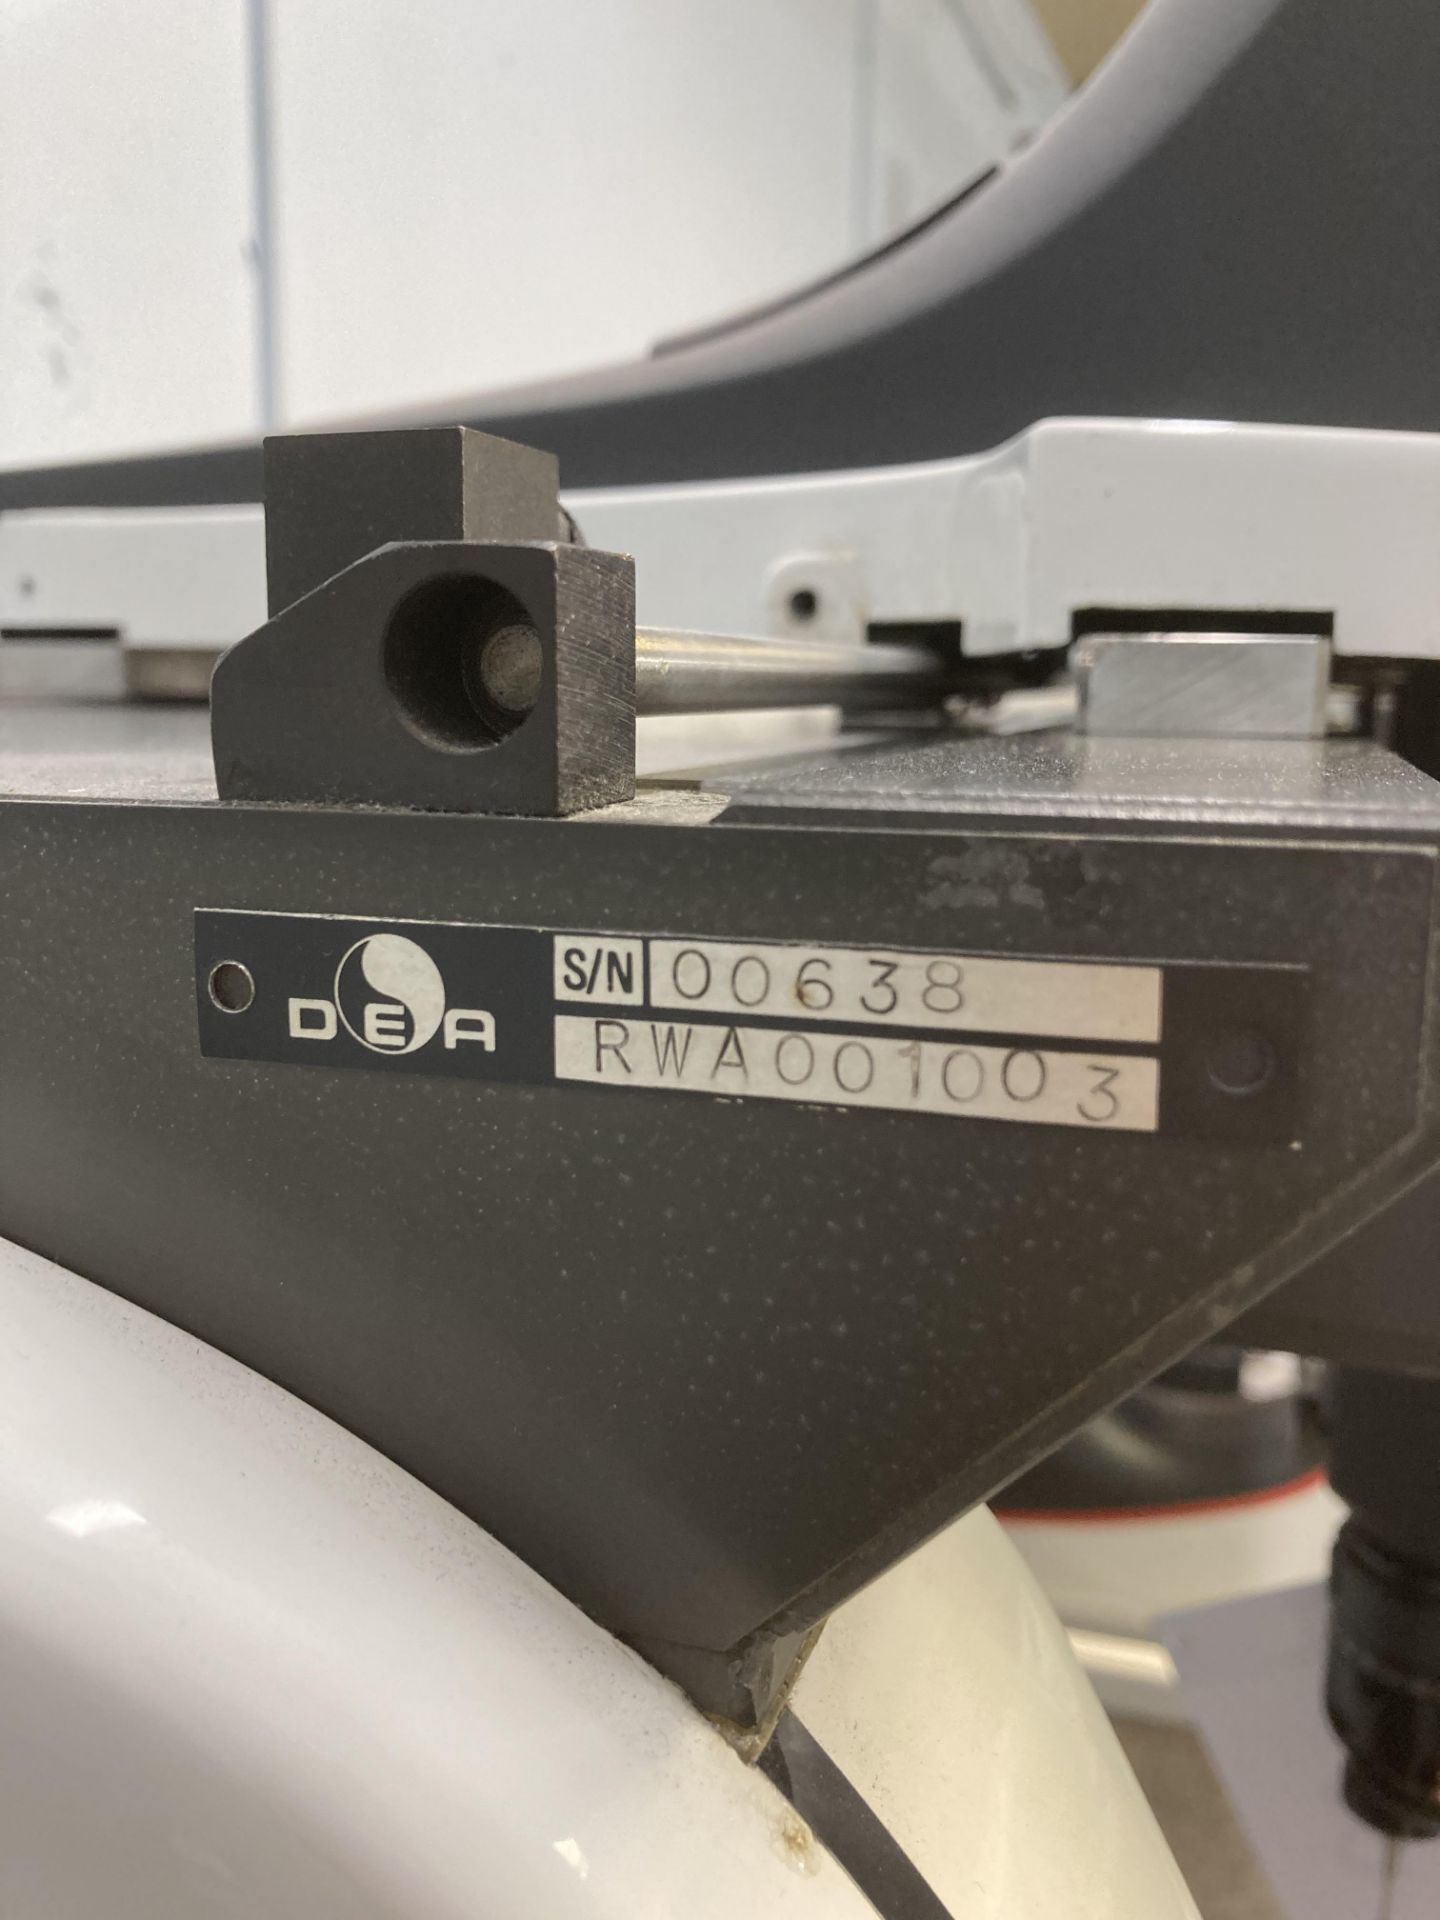 Hexagon Metrology Swift coordinate measuring machine, Serial No. 00638 (calibrated 11/20) with - Image 3 of 5